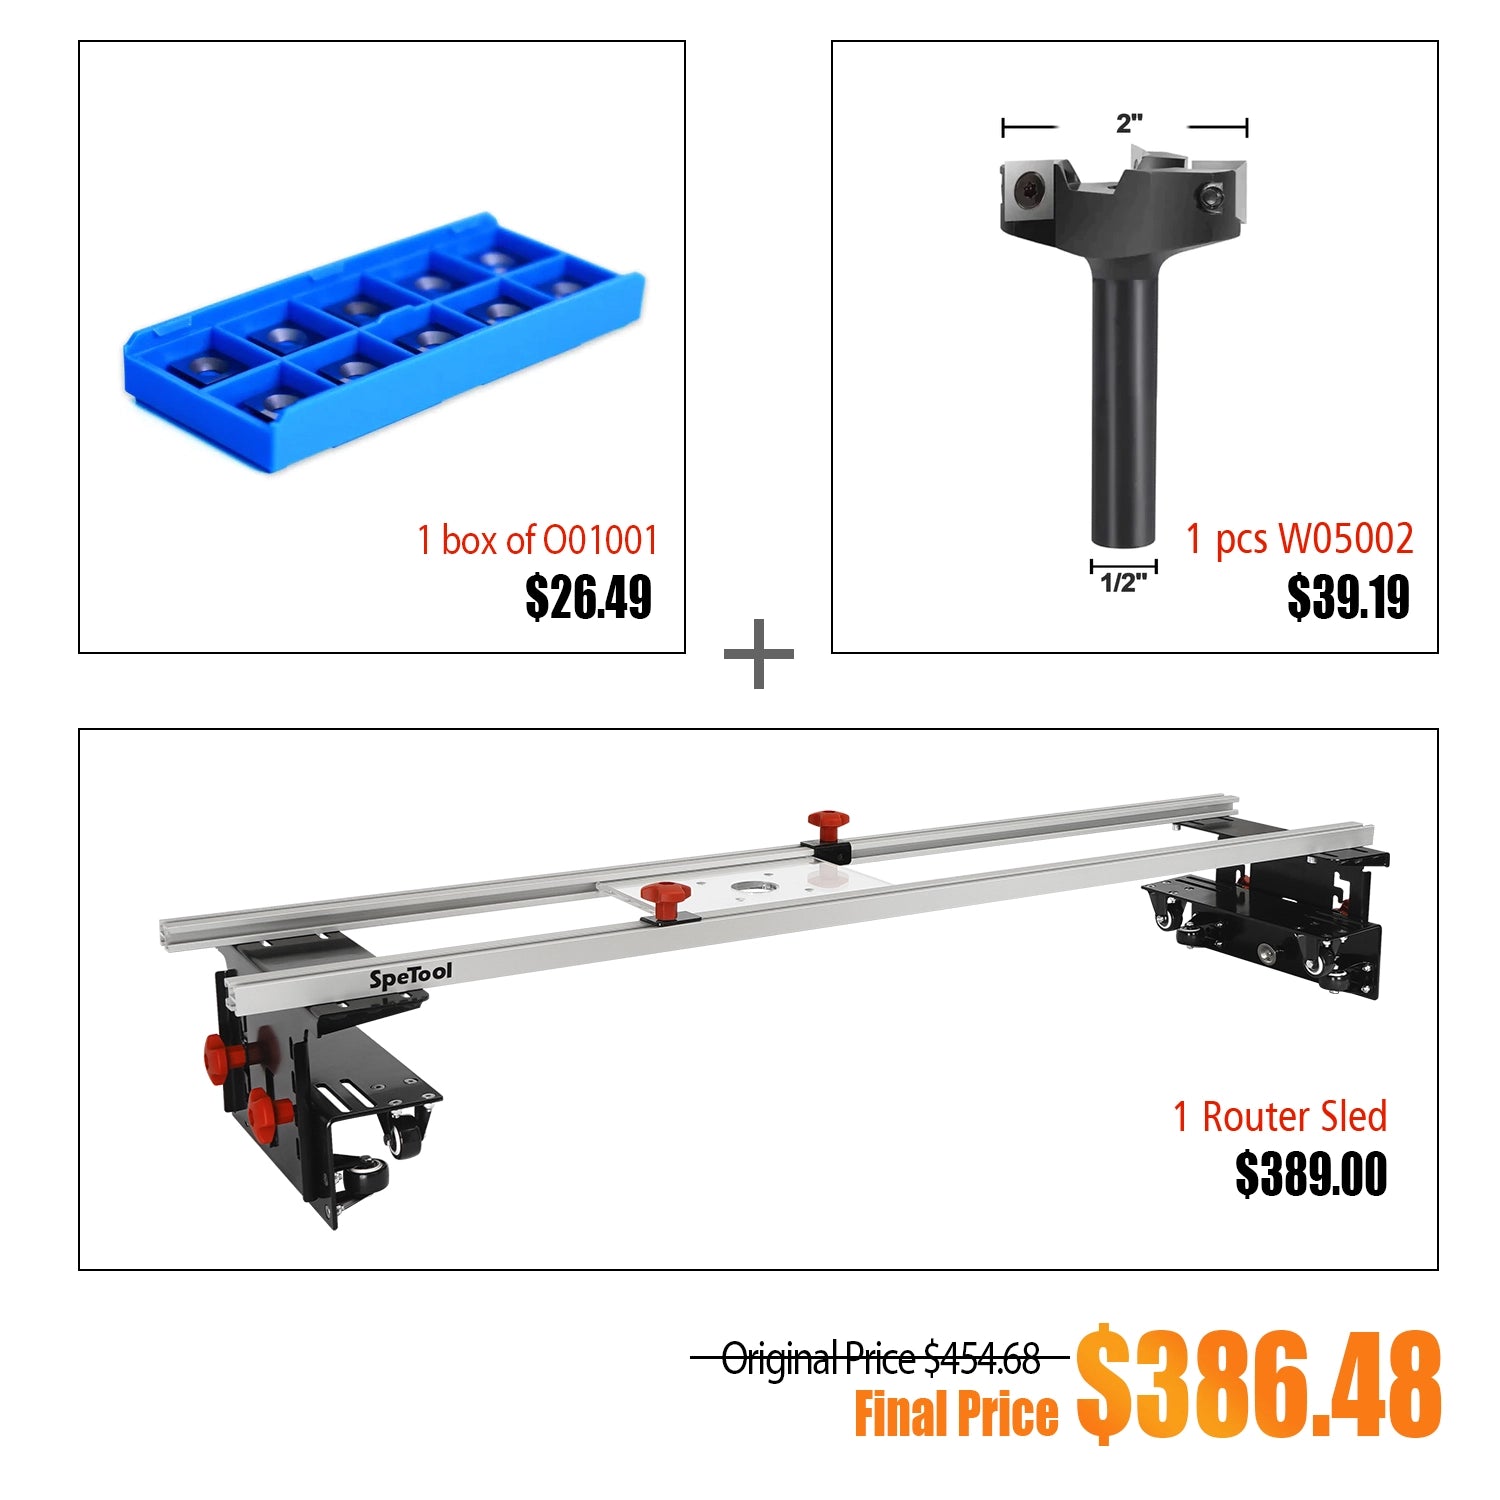 !!!【Pre-ordering】Bundle buying Save Up To $74 | SpeTool Cratos S01001 Machinist-Grade Router Sled & Spoilboard Surfacing Bits & Carbide Insert Kits-3